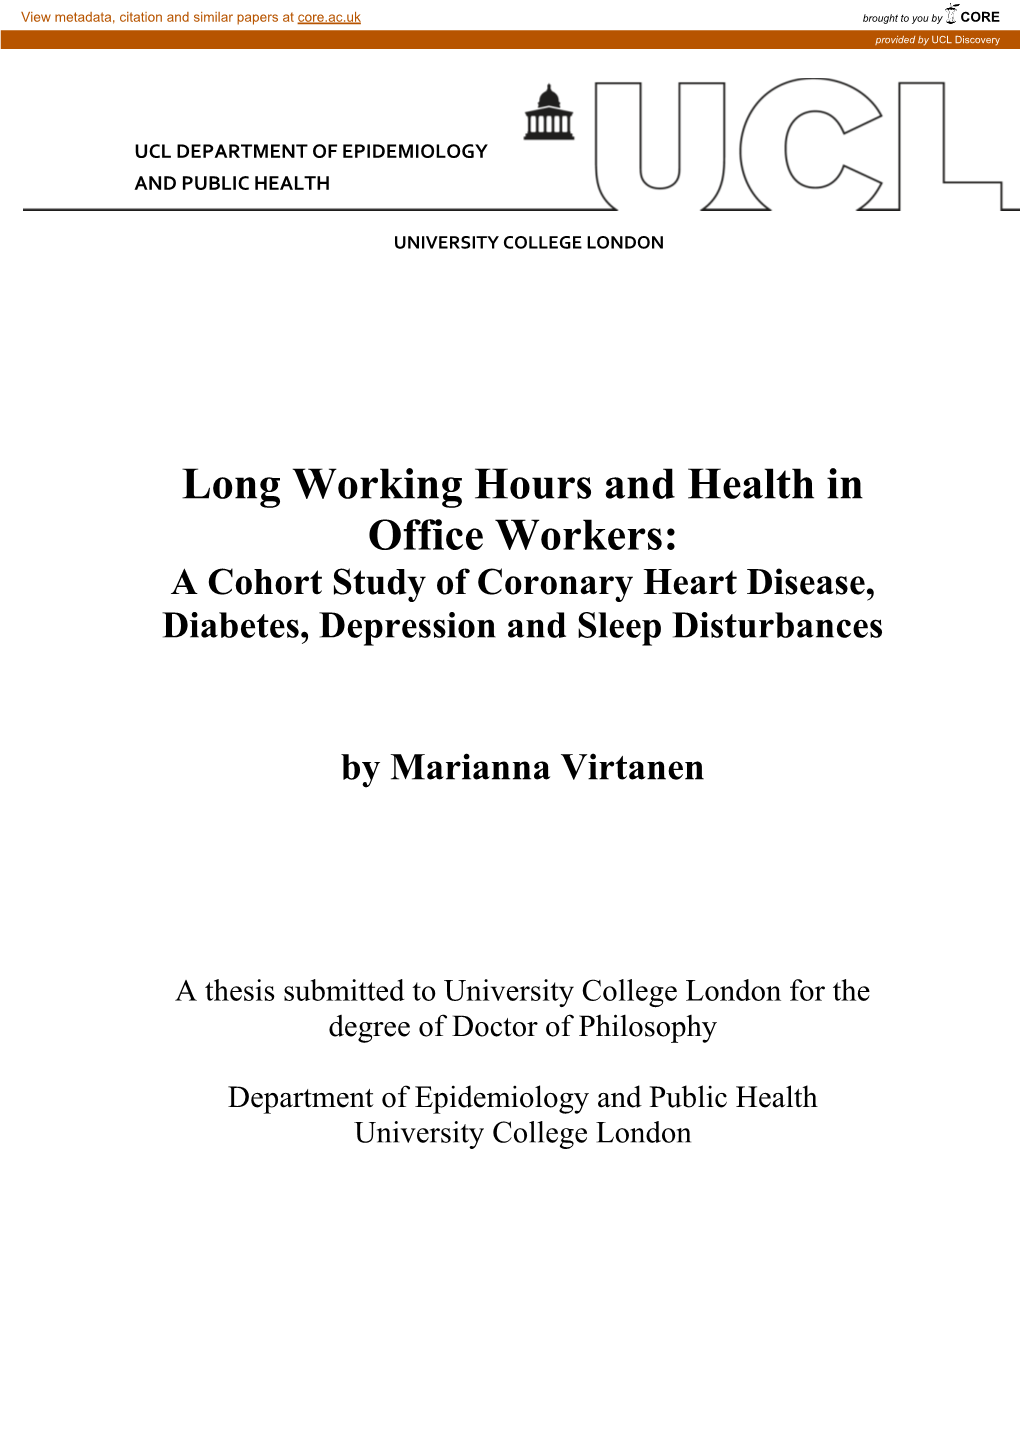 Long Working Hours and Health in Office Workers: a Cohort Study of Coronary Heart Disease, Diabetes, Depression and Sleep Disturbances